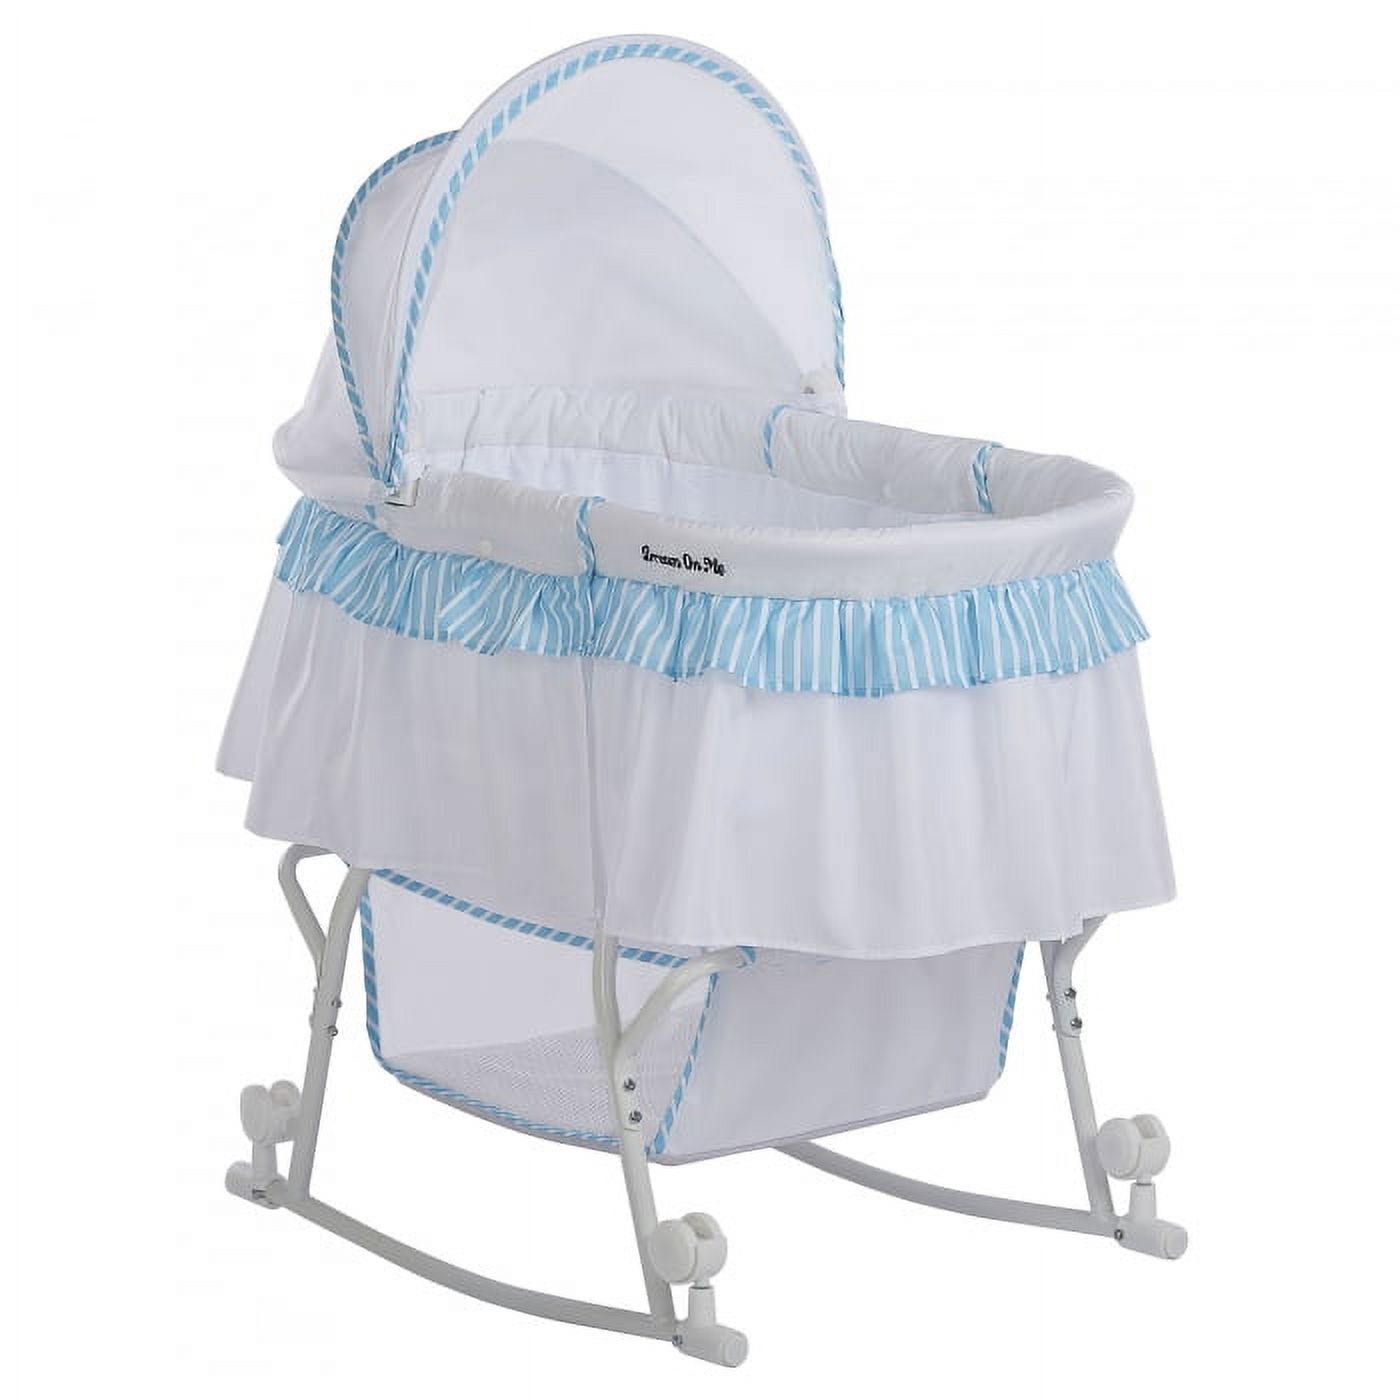 Dream On Me Lacy Portable 2-in-1 Bassinet & Cradle in Blue and White, Lightweight Baby Bassinet - image 1 of 6